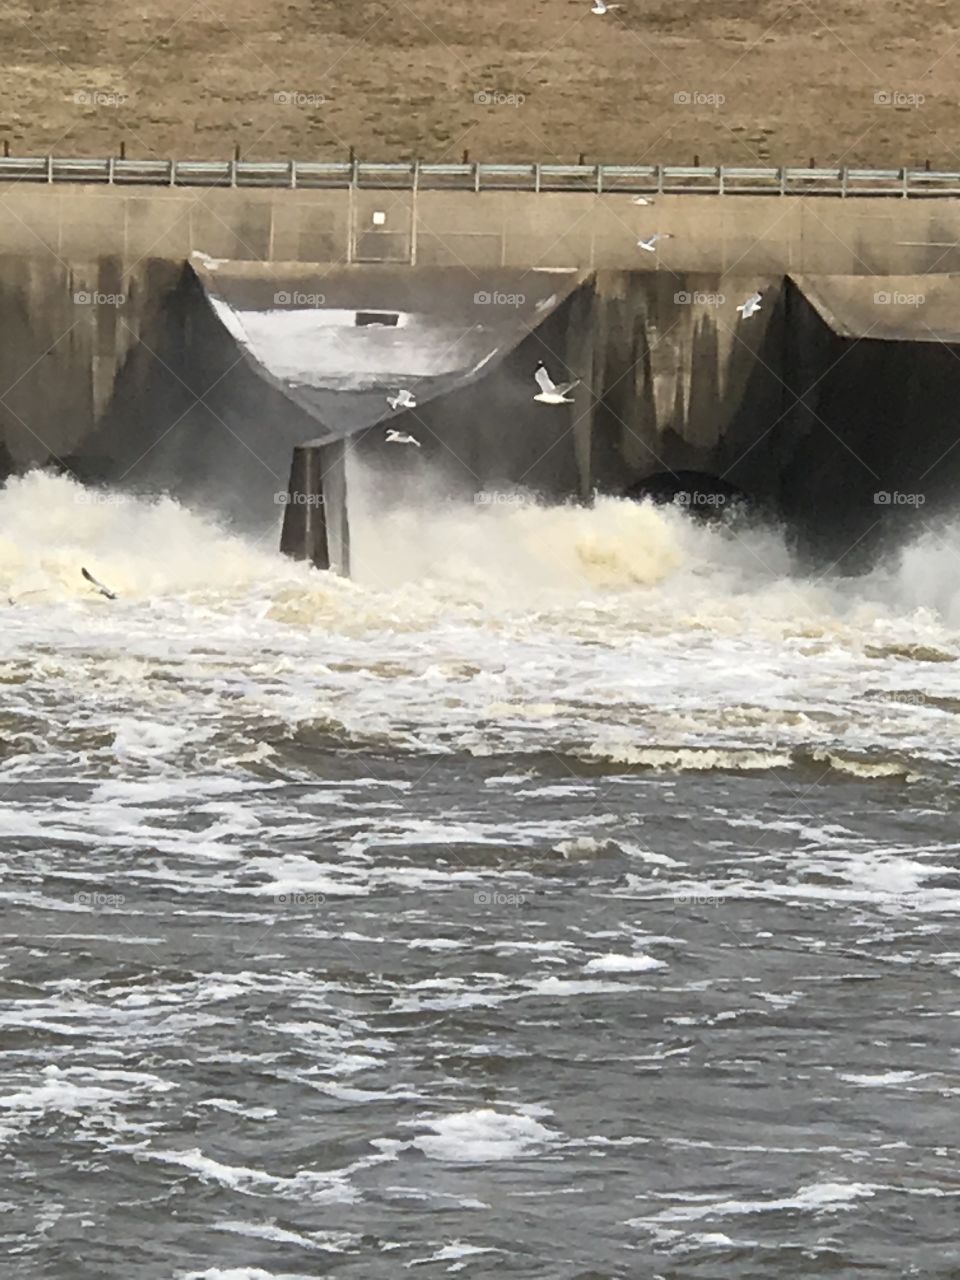 US Army Corps of Engineers Oologah , Oklahoma Dam flood gates open at January winter water release with icing on dam concrete, birds seagulls searching turbulence in channel of roaring water for fish